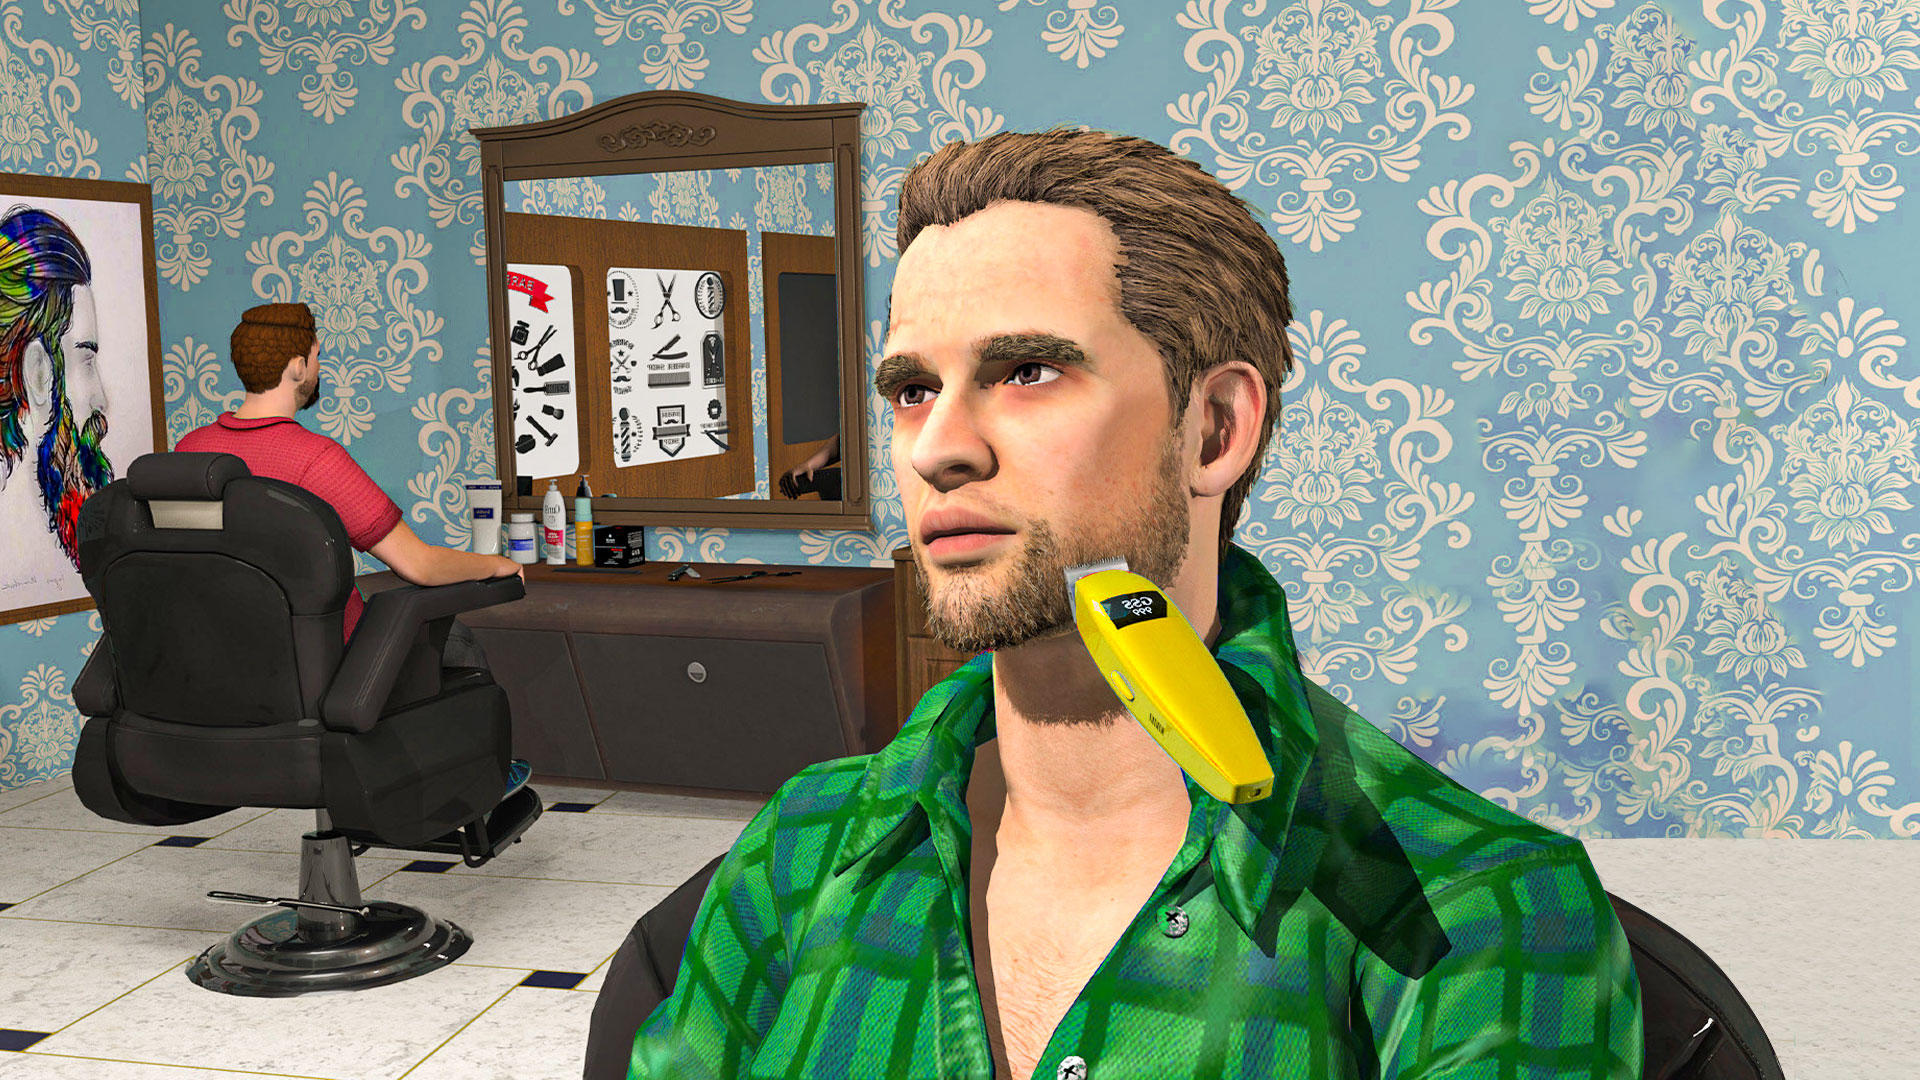 Barber Shop Beard Salon and Hair Style Games Apk Download for